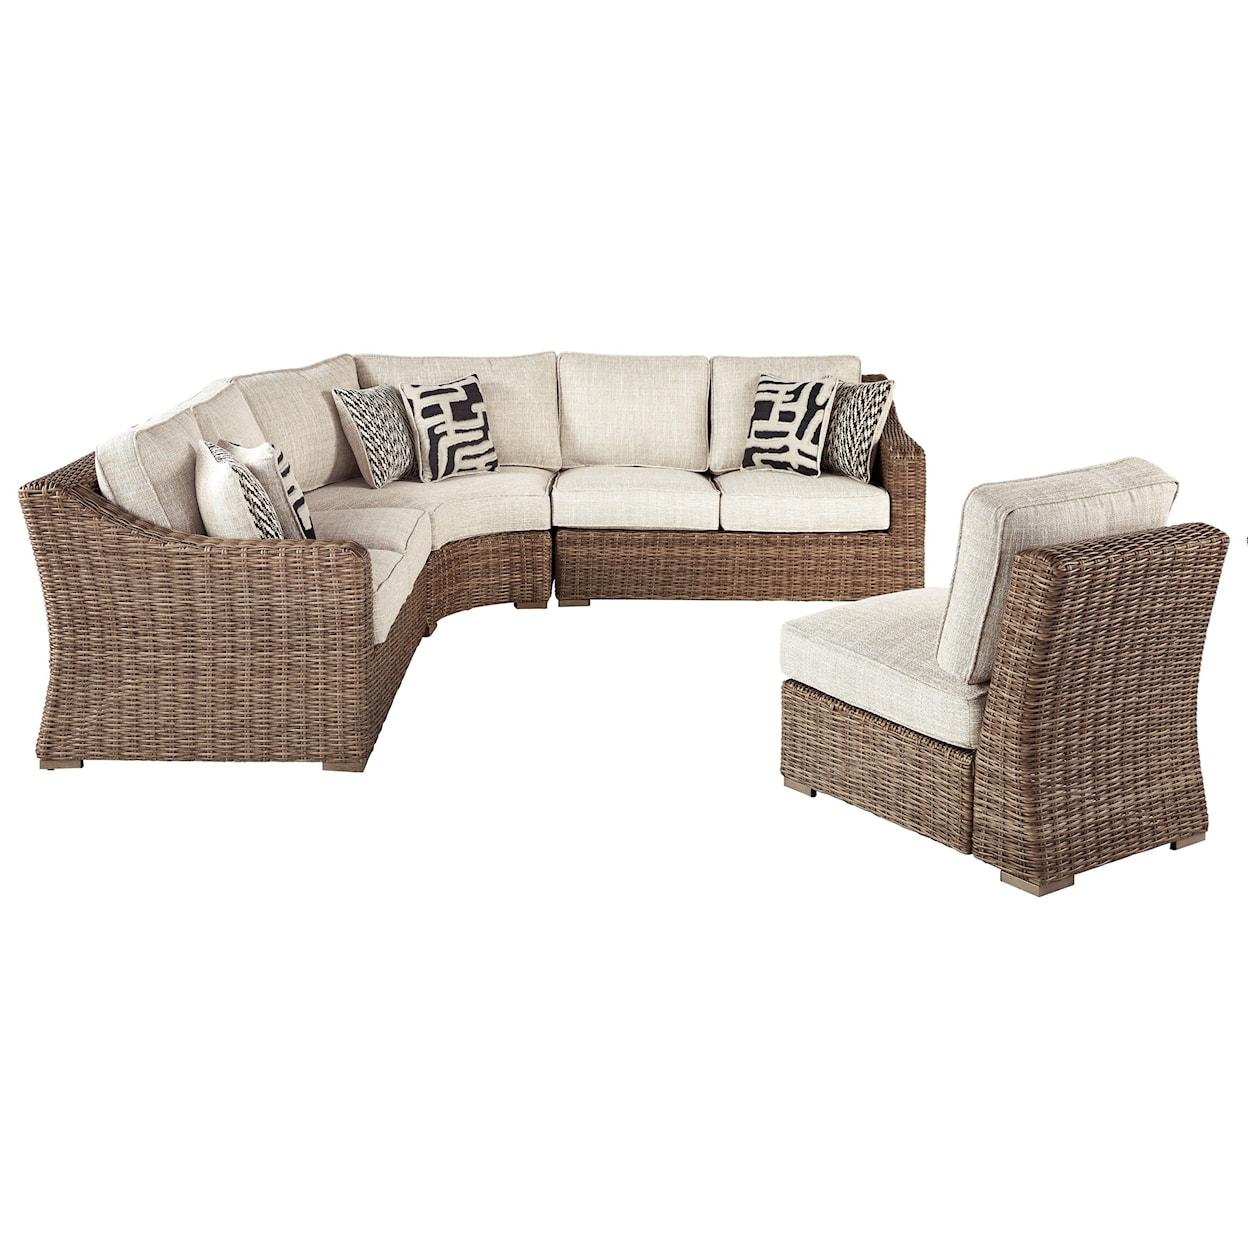 Signature Design by Ashley Beachcroft 4 Piece Sectional